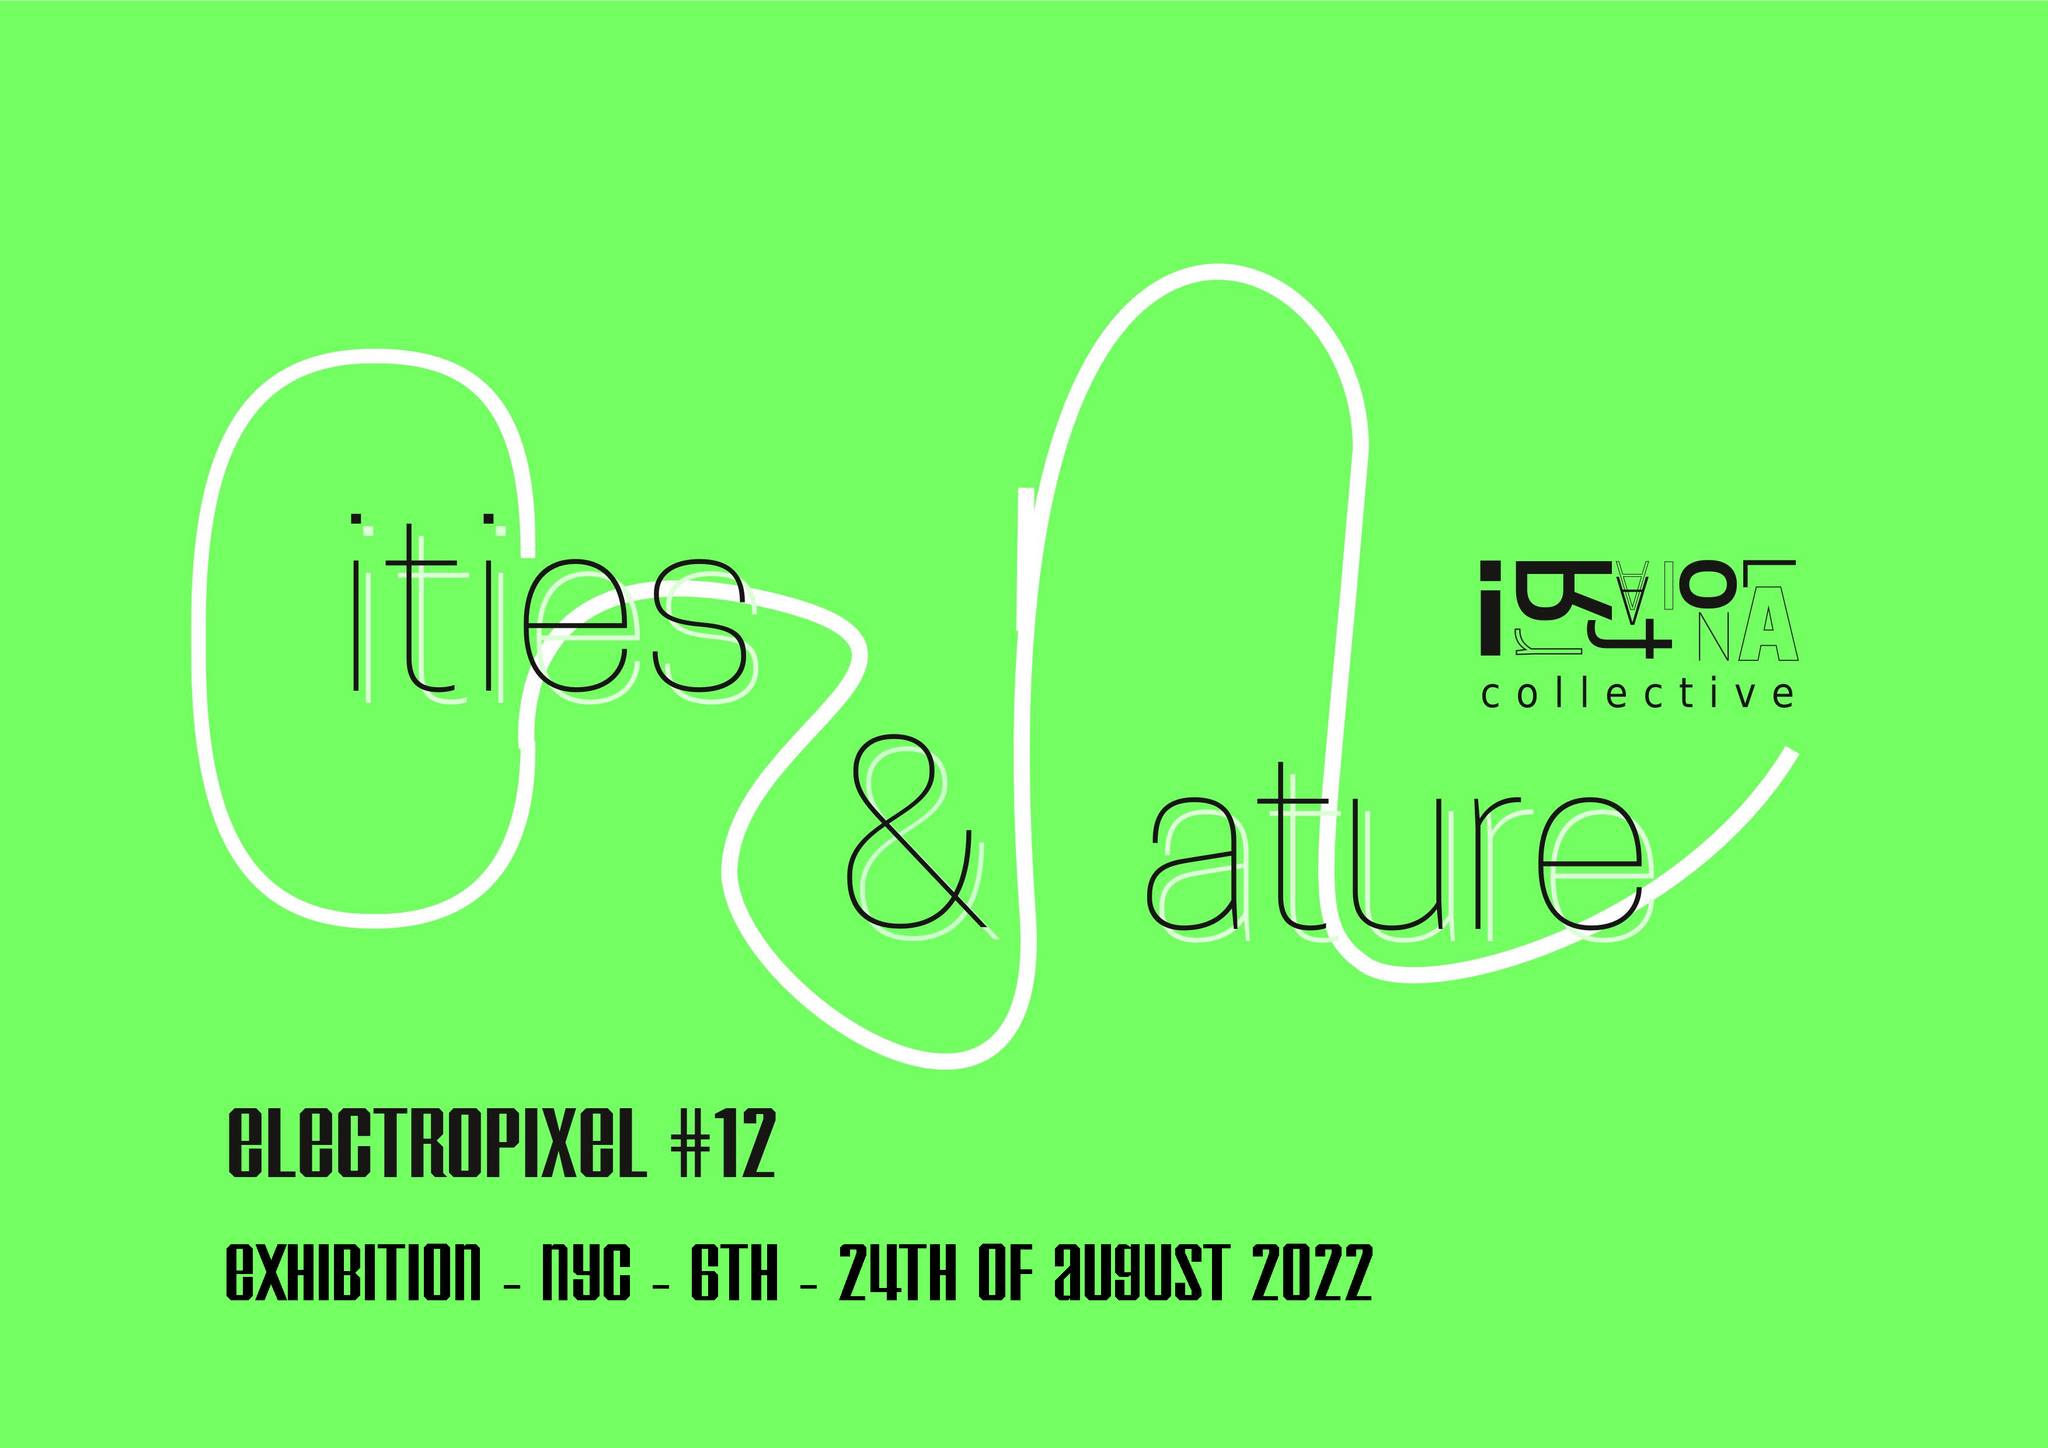 Electropixel 12 – NYC – Exhibition – 6th to 24th August